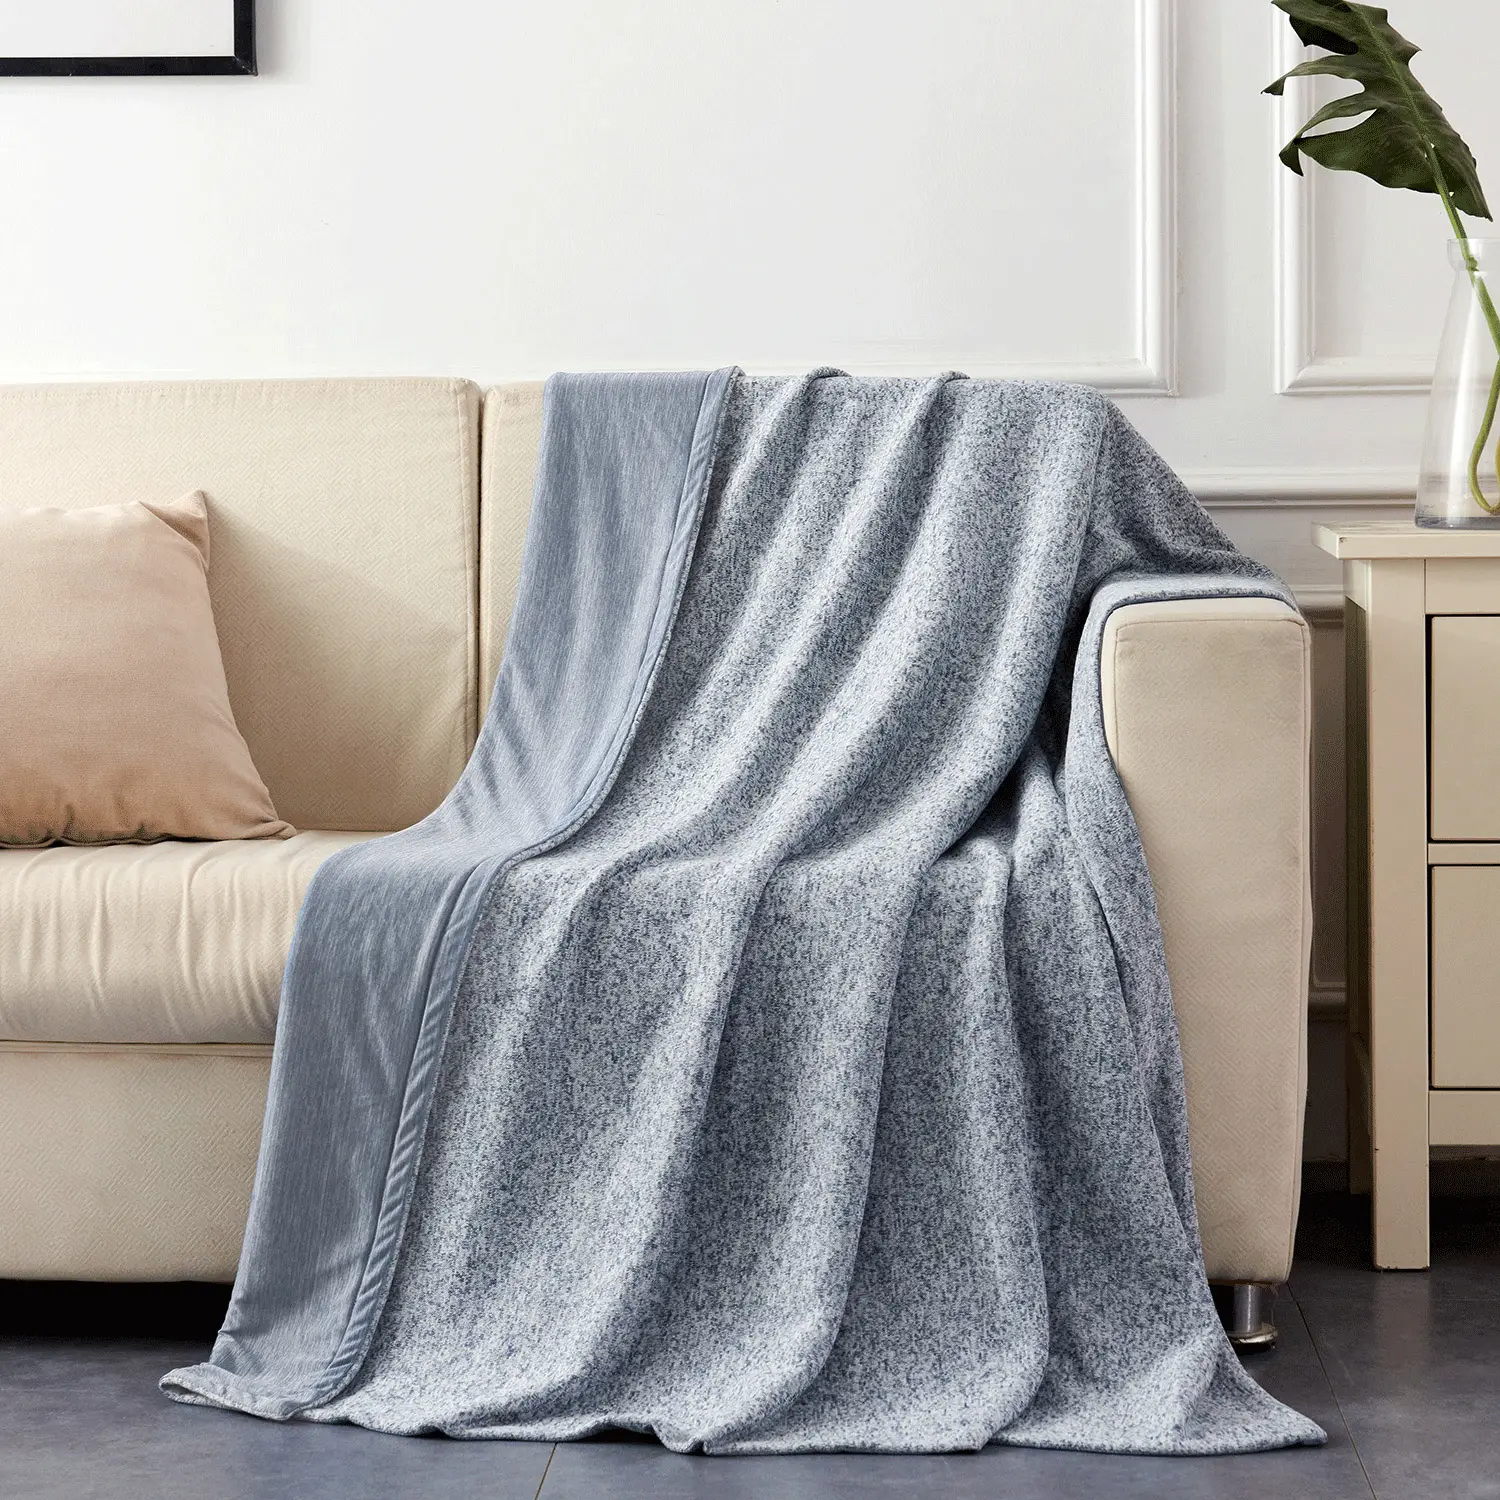 Jml Reversible With Warm Microknit And Quadchill Fabric Design Summer Cooling Blanket